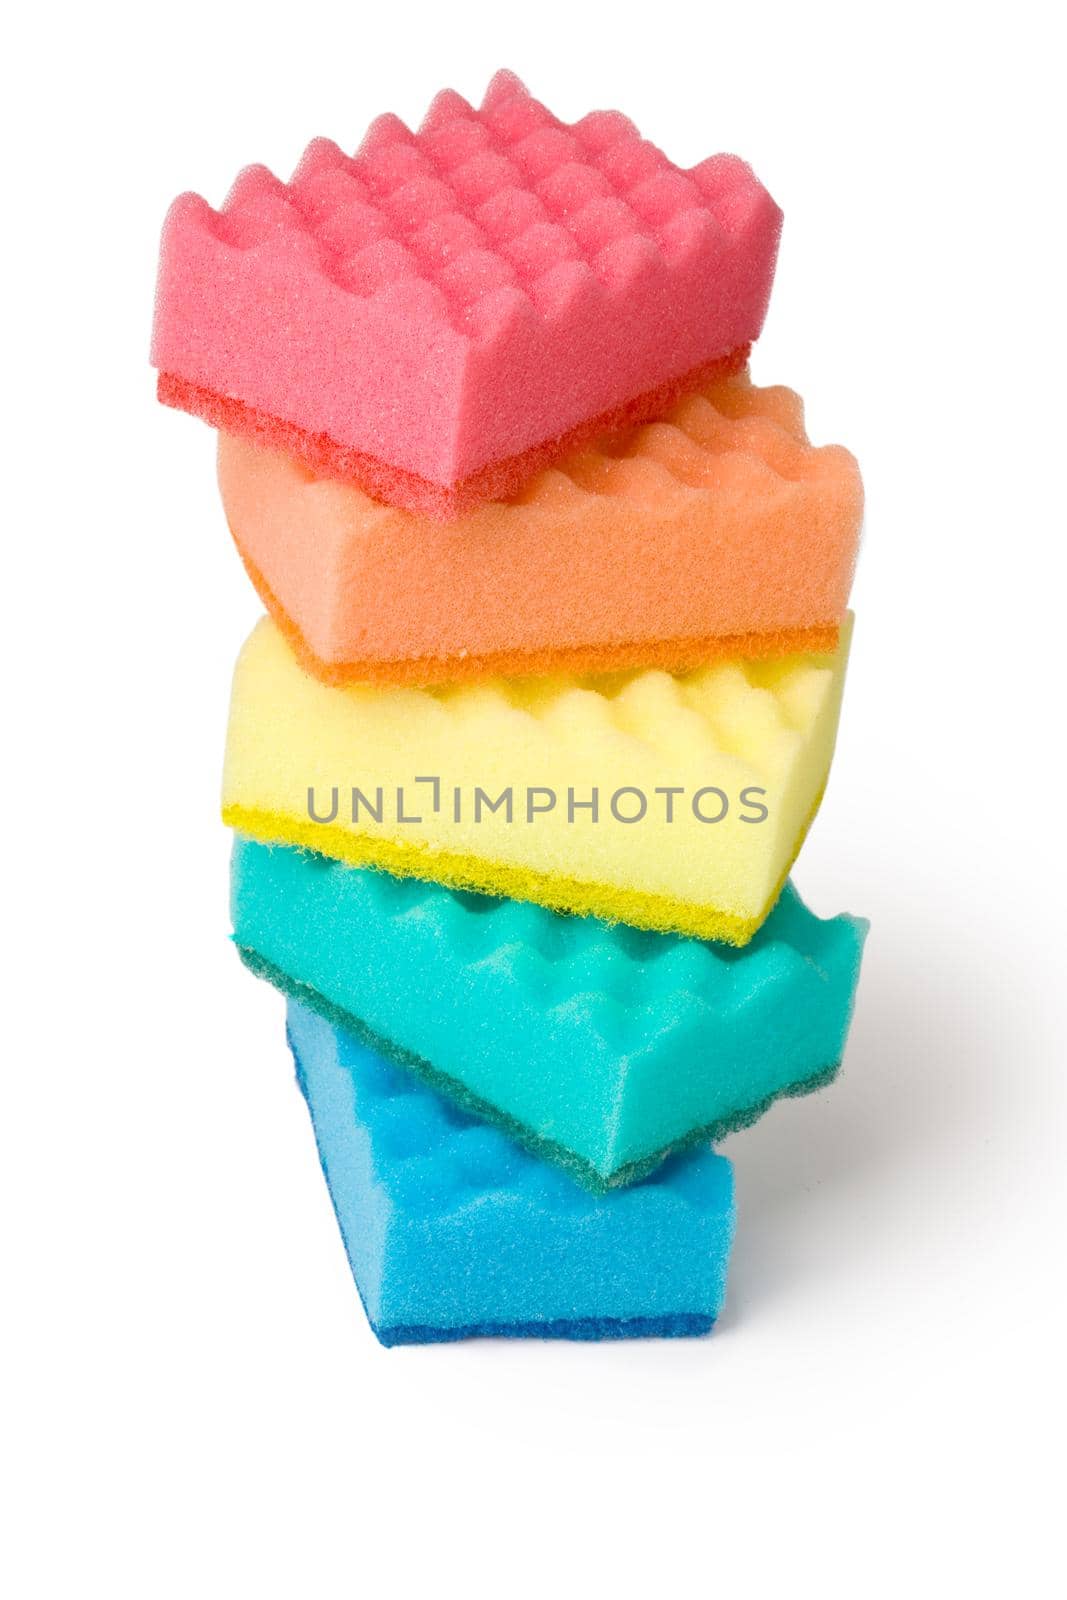 Stack of cleaning sponges on a white background.